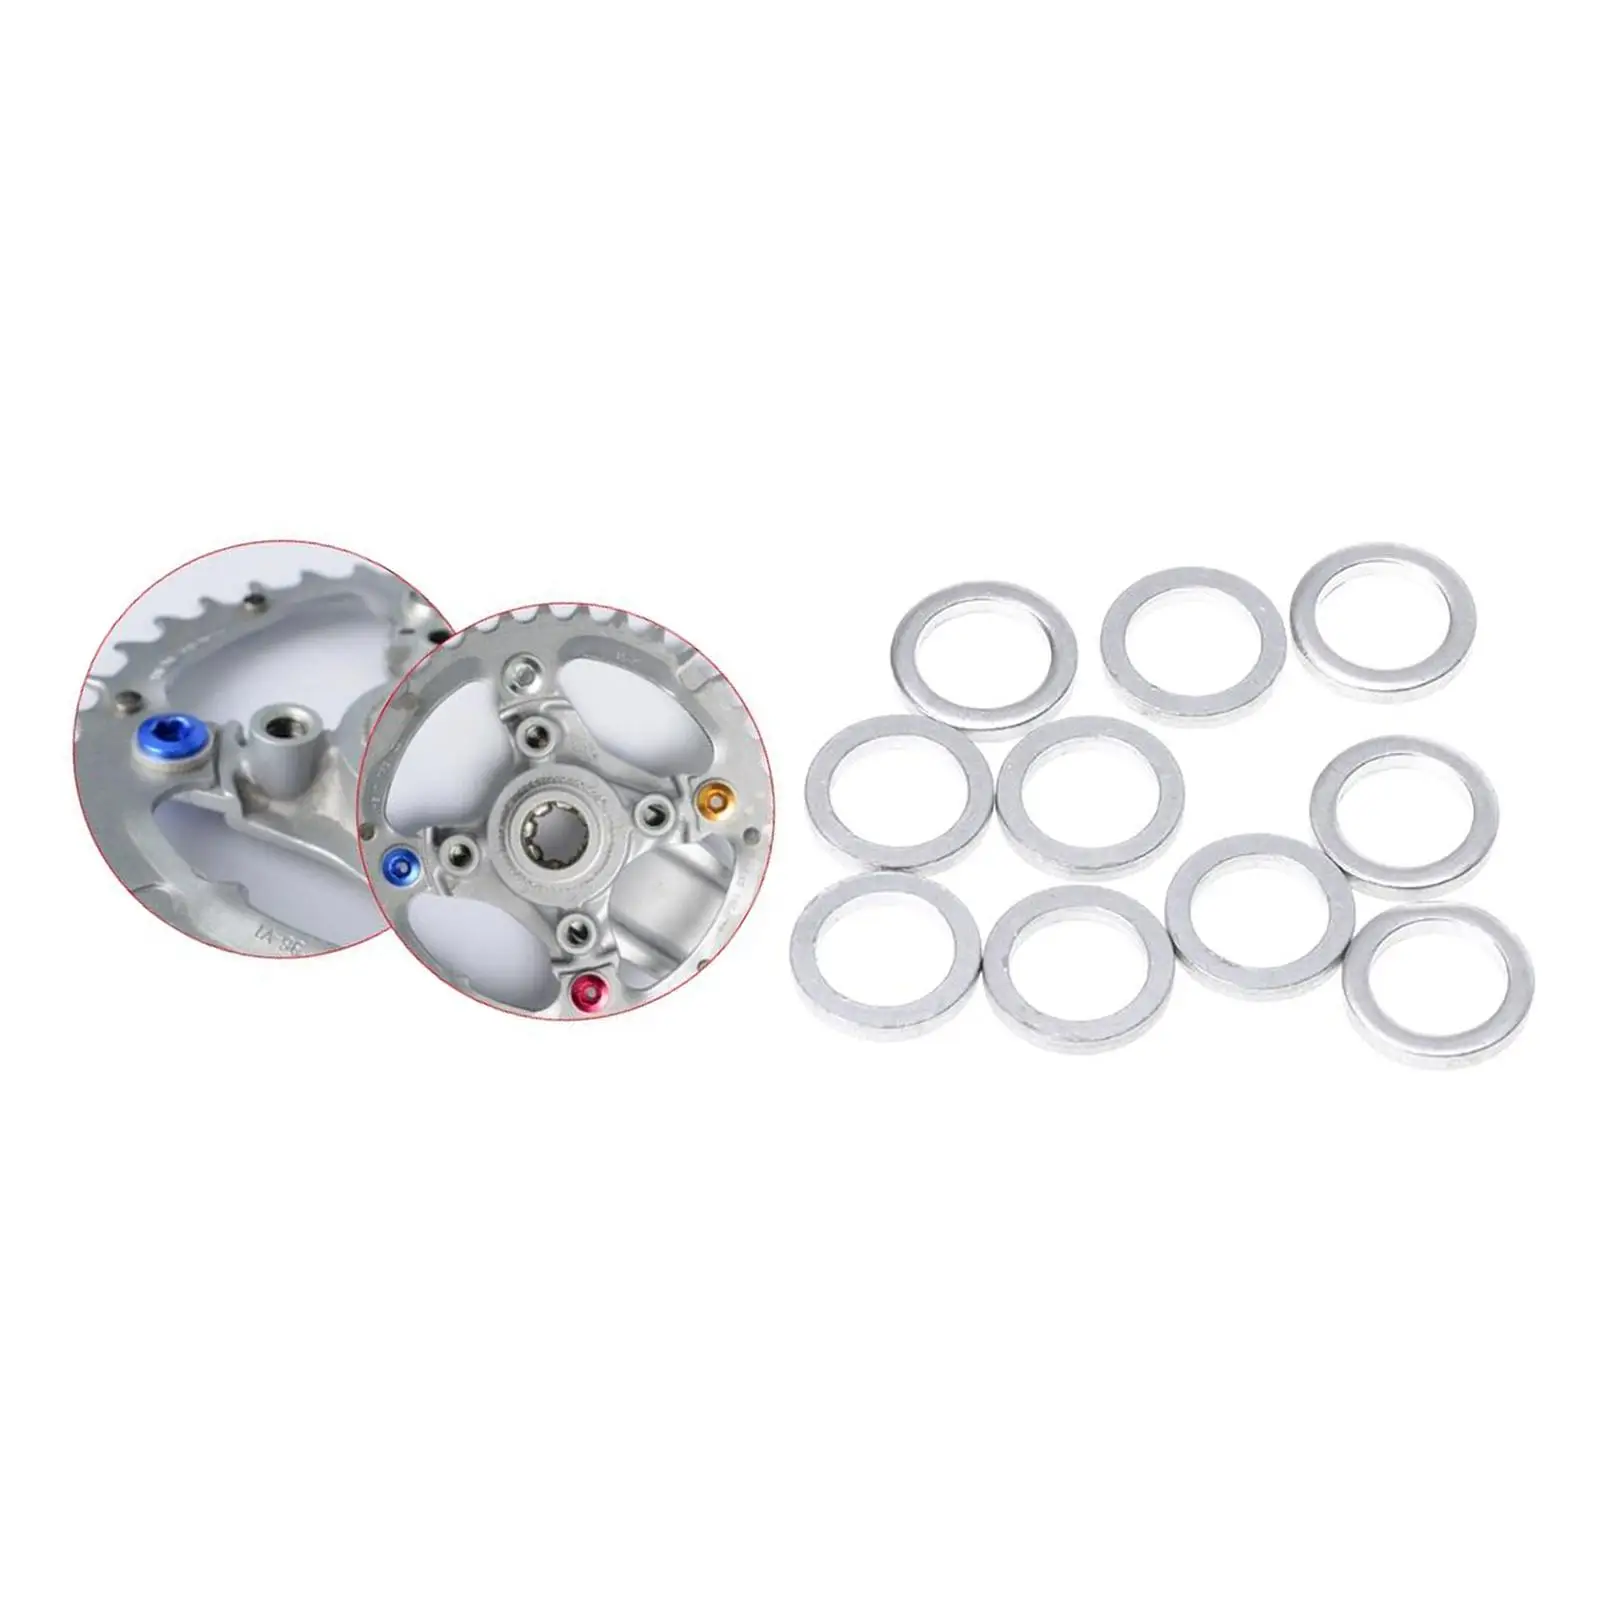 10Pack Bike  Aluminum Replacement Chainring Screw Spacer Washer Gasket Fixing Part 1mm Thick